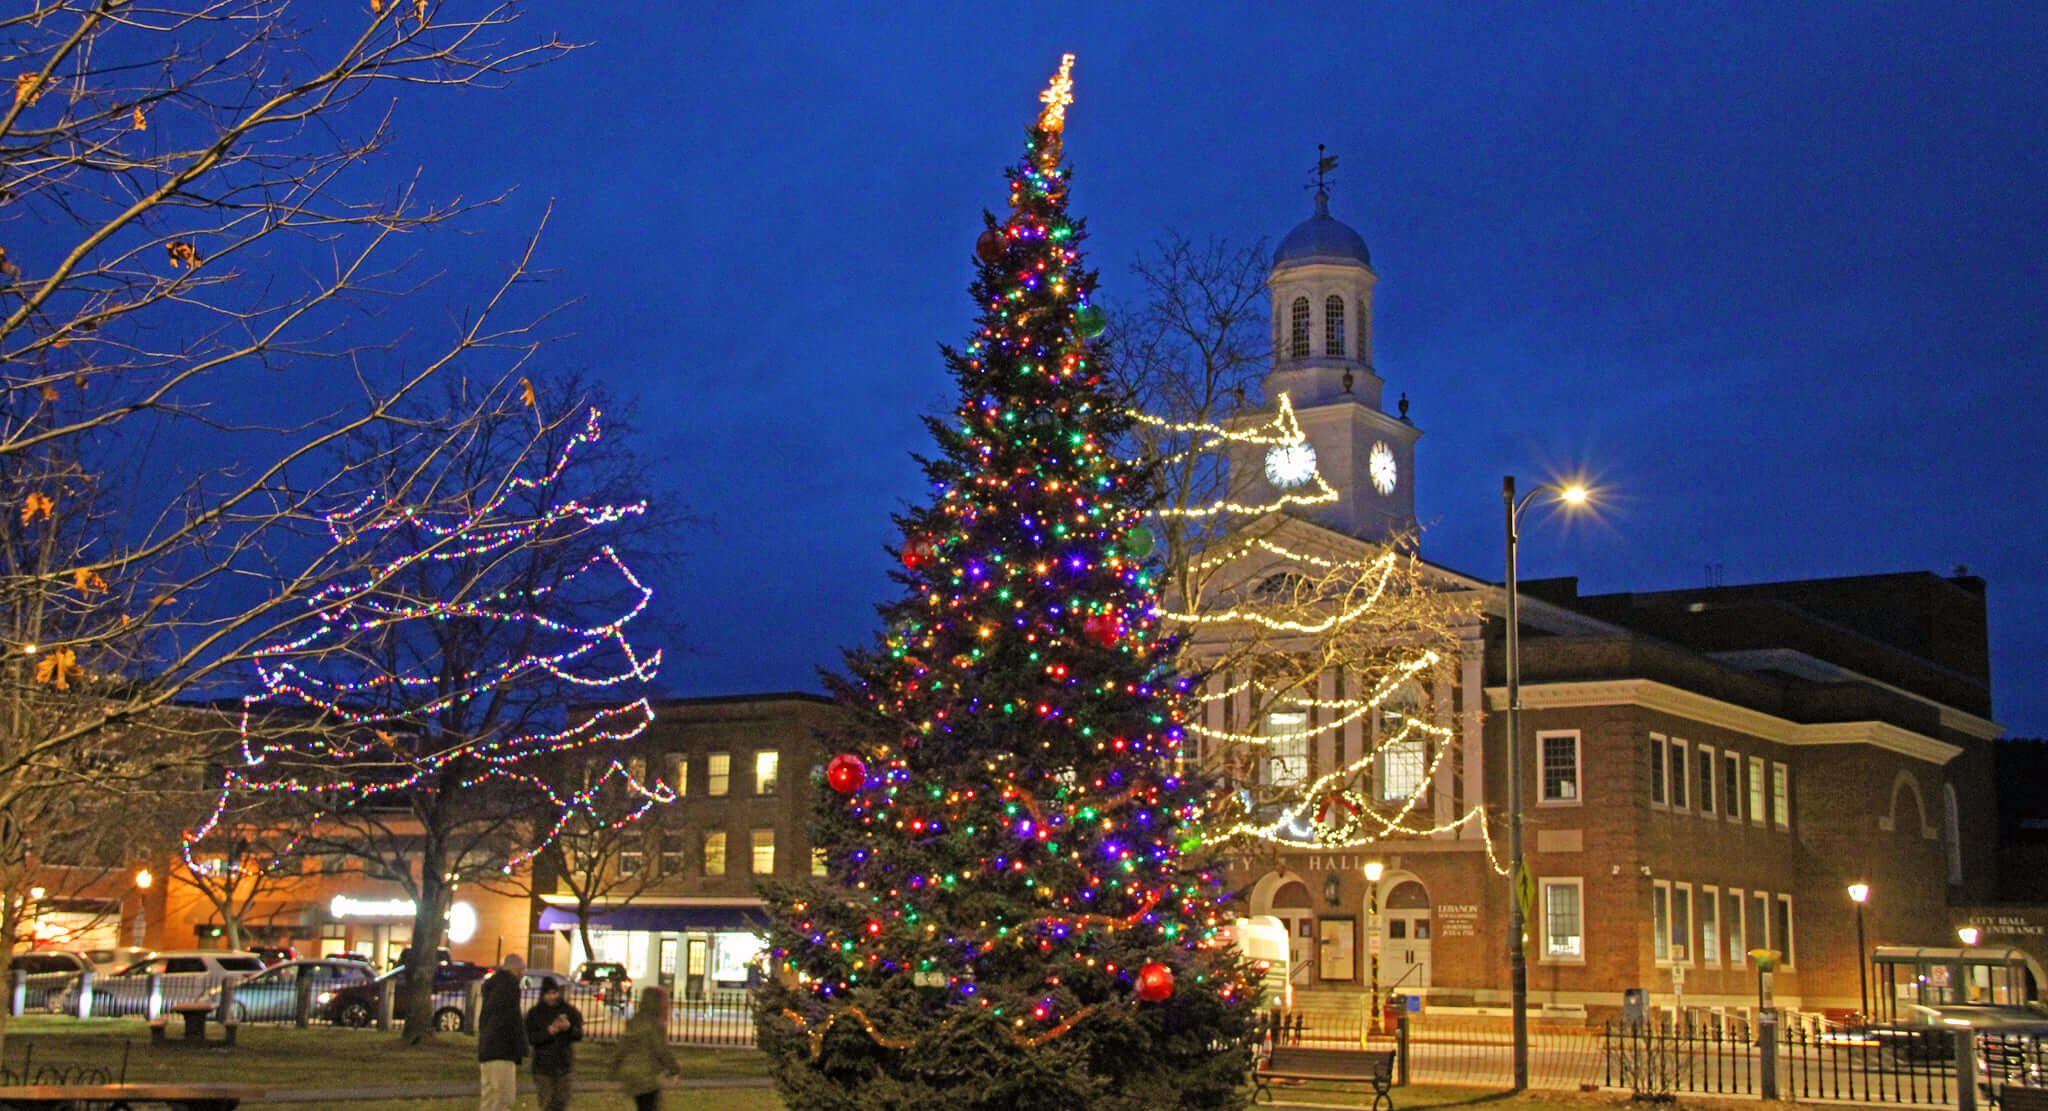 New Hampshire Travel Council Downtown Lebanon, New Hampshire Holiday Lights byDavid Nelson